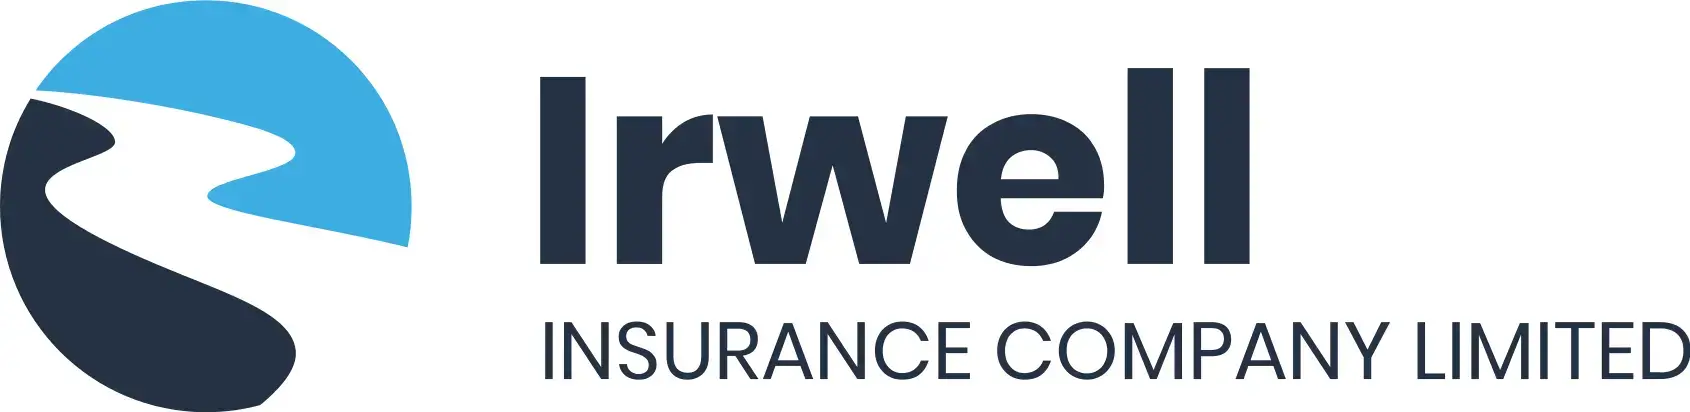 Risk, Audit and Compliance Management Software - Irwell Insurance Company Limited